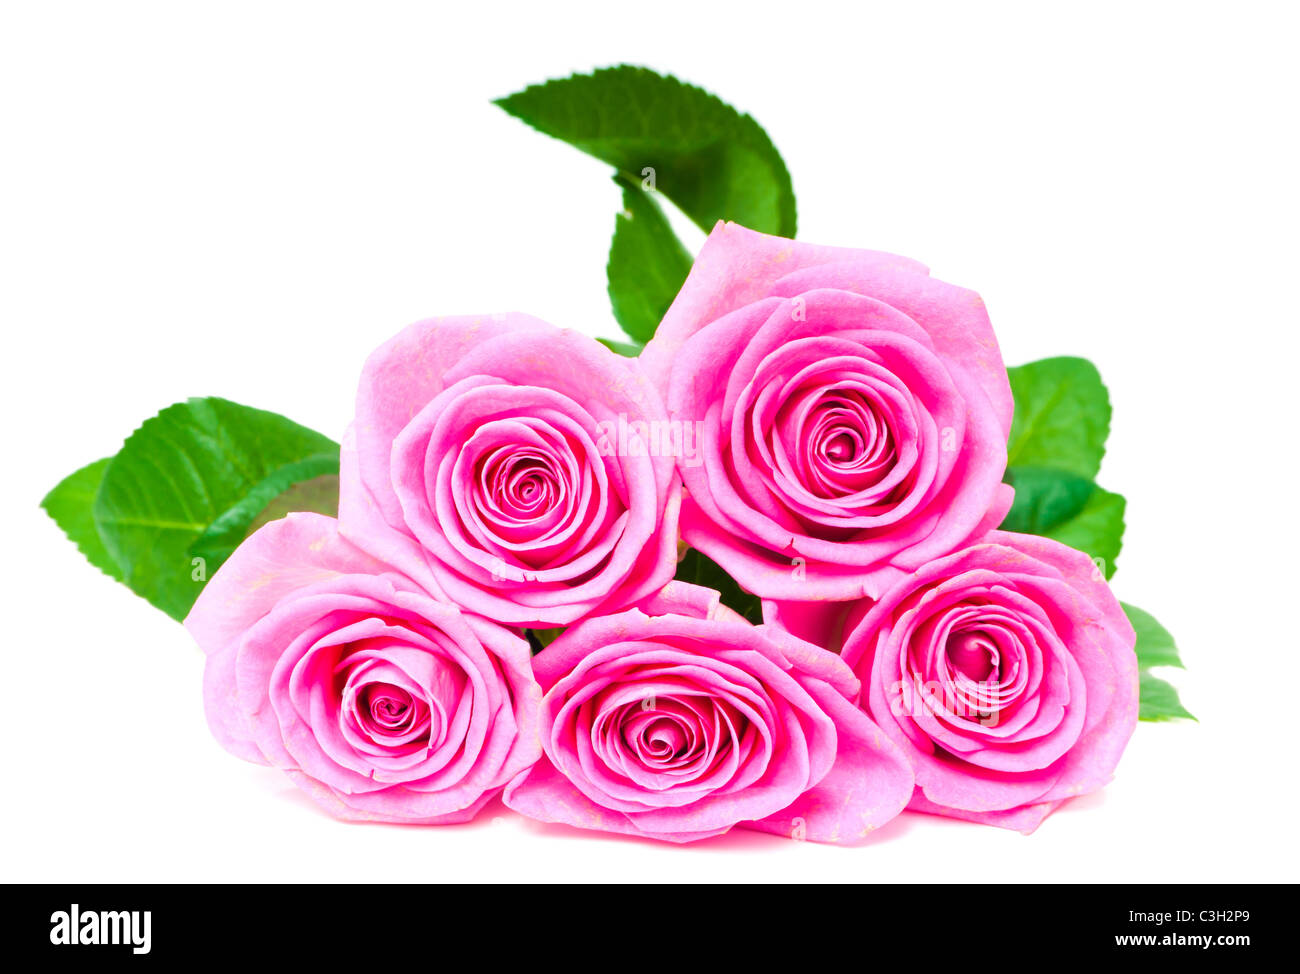 Pink roses Cut Out Stock Images & Pictures - Alamy